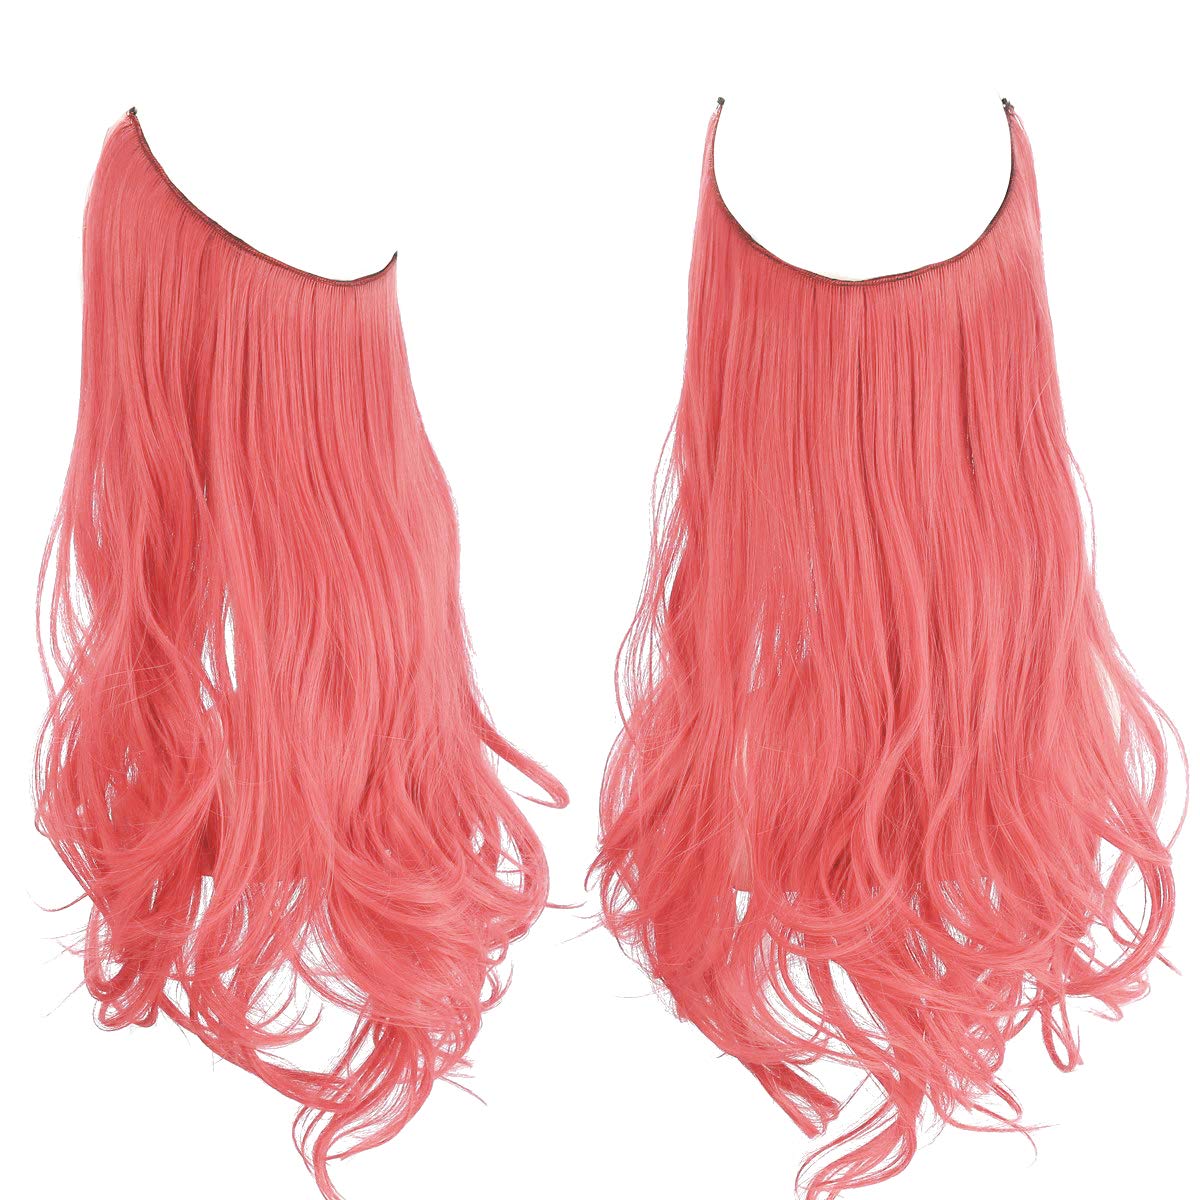 Haloo Pink Colored Hair Extensions Princess Pink Rose Curly Long Synthetic Hairpiece 18 Inch 4.2 Oz Hidden Wire Headband for Women Girl Kid Party Heat Resistant Fiber No Clip (M01&Princess Pink)